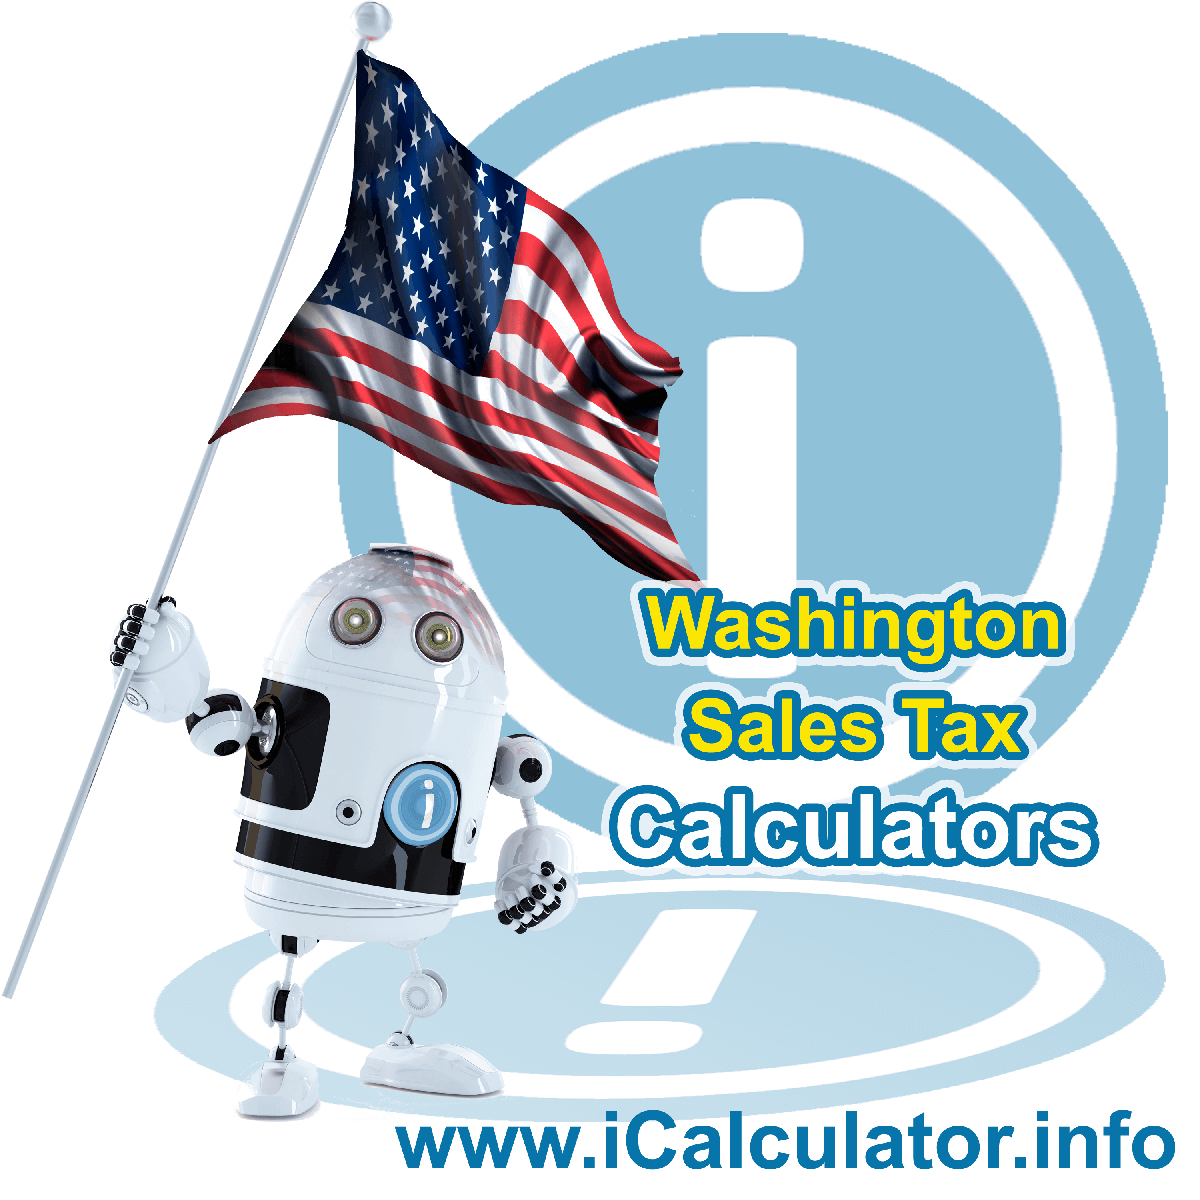 Chelan Sales Rates: This image illustrates a calculator robot calculating Chelan sales tax manually using the Chelan Sales Tax Formula. You can use this information to calculate Chelan Sales Tax manually or use the Chelan Sales Tax Calculator to calculate sales tax online.